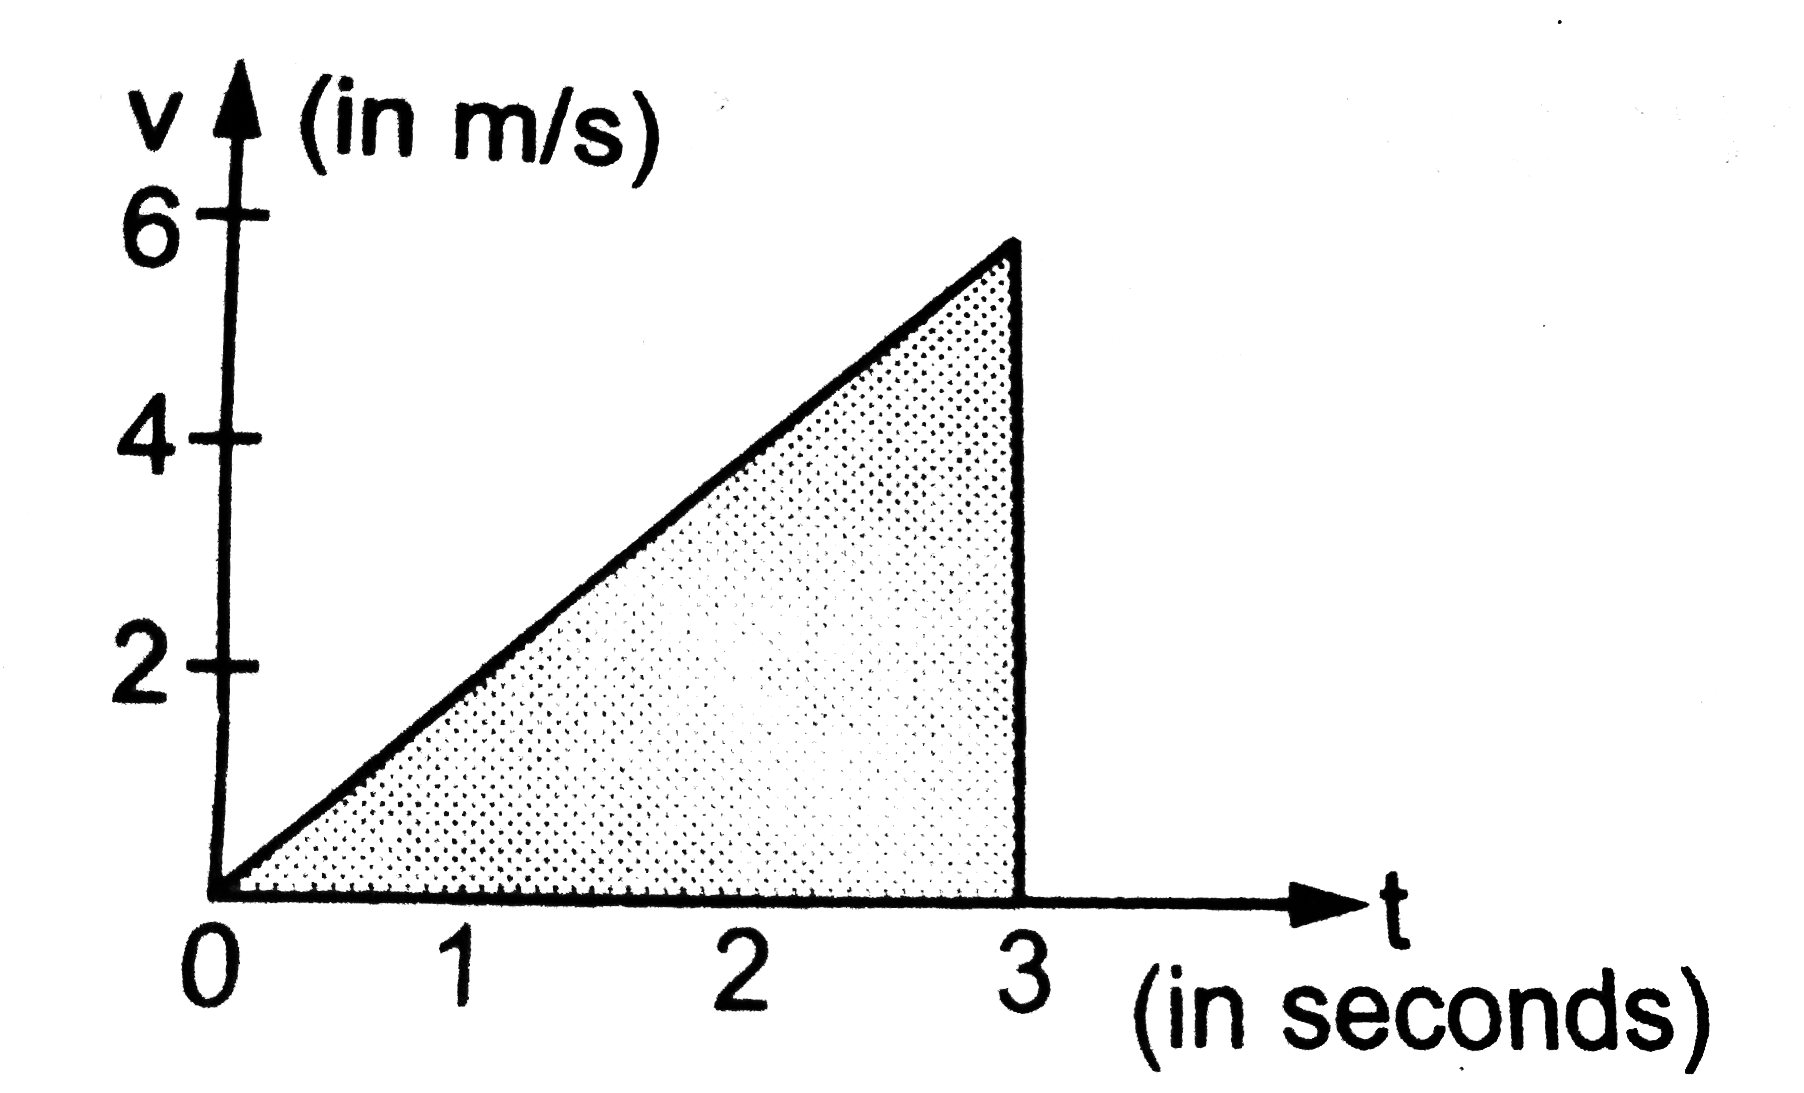 Figure shows the speed versus time graph for a particle. Find the distance travelled by the particle during the time t=0 to t=3s.